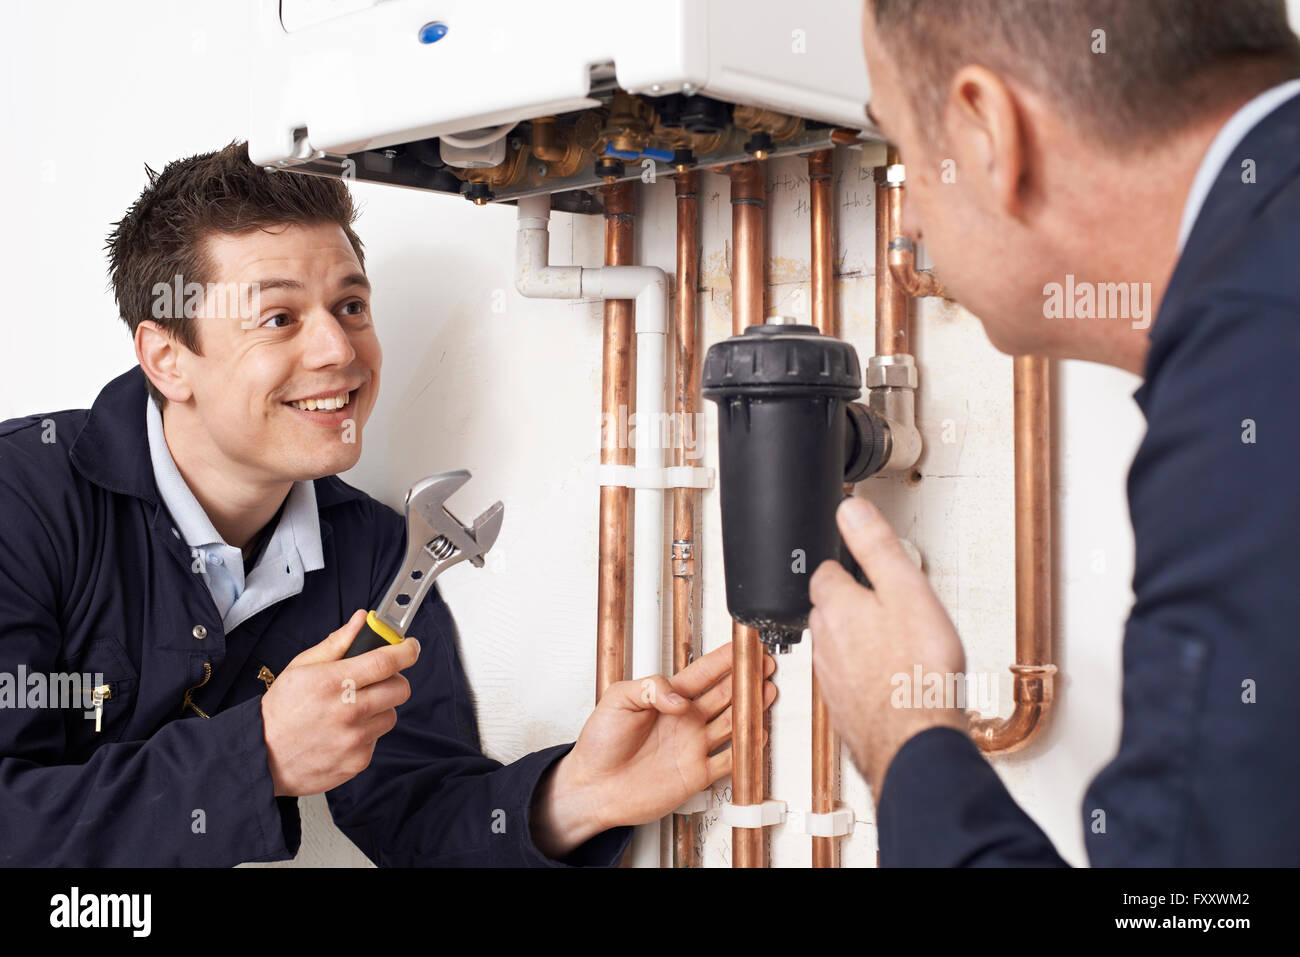 Trainee Plumber Working On Central Heating Boiler Stock Photo